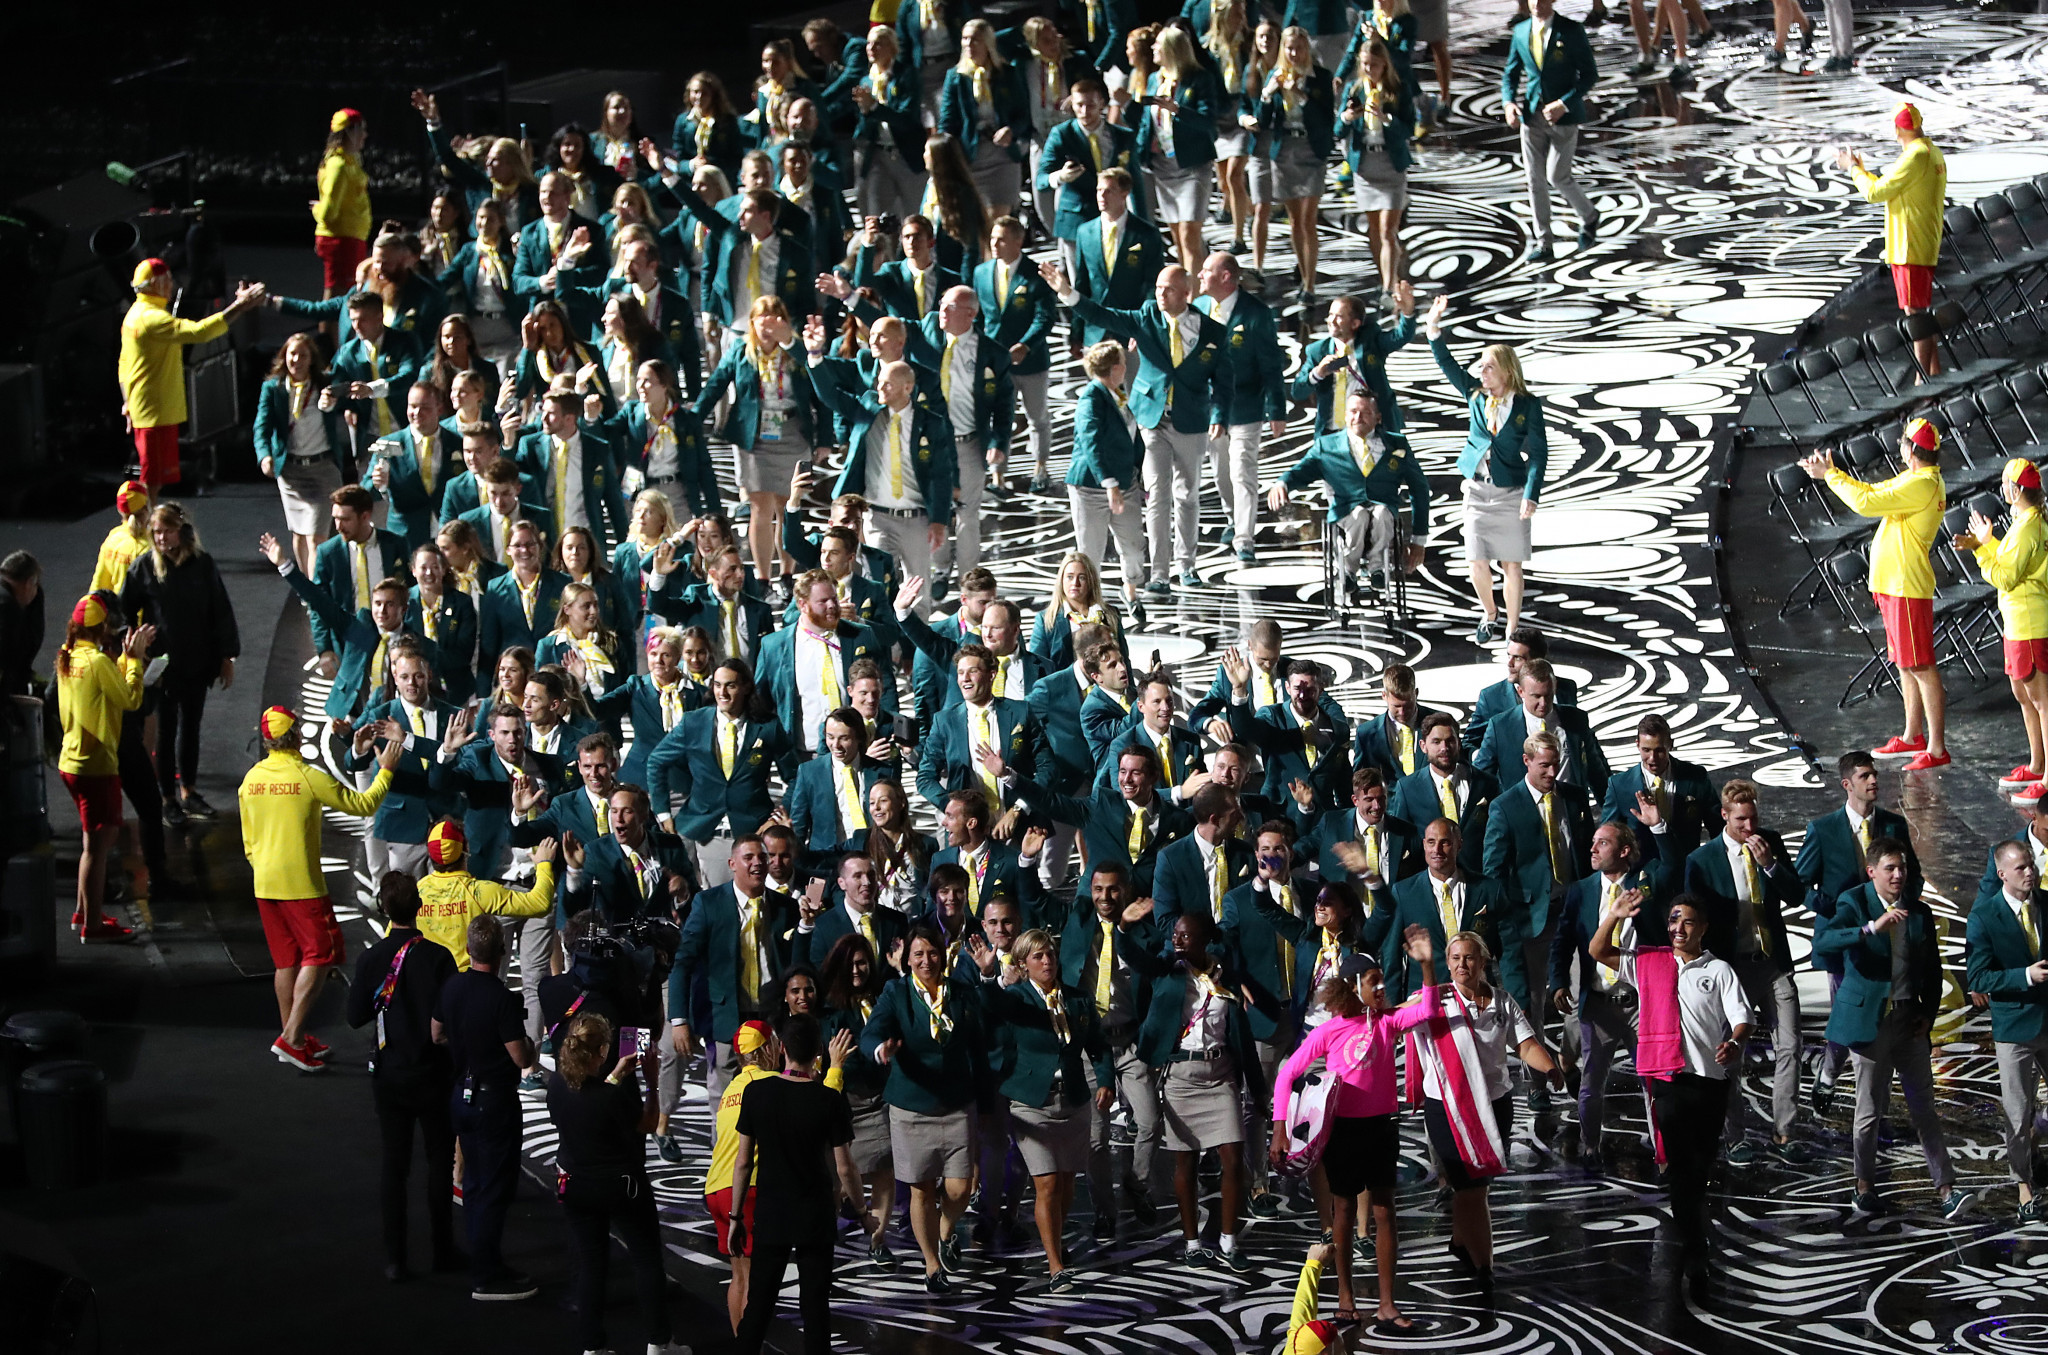 The iconic song Down Under by Men at Work blared out as host nation Australia came out last during the parade of nations at the Opening Ceremony of Gold Coast 2018 ©Getty Images